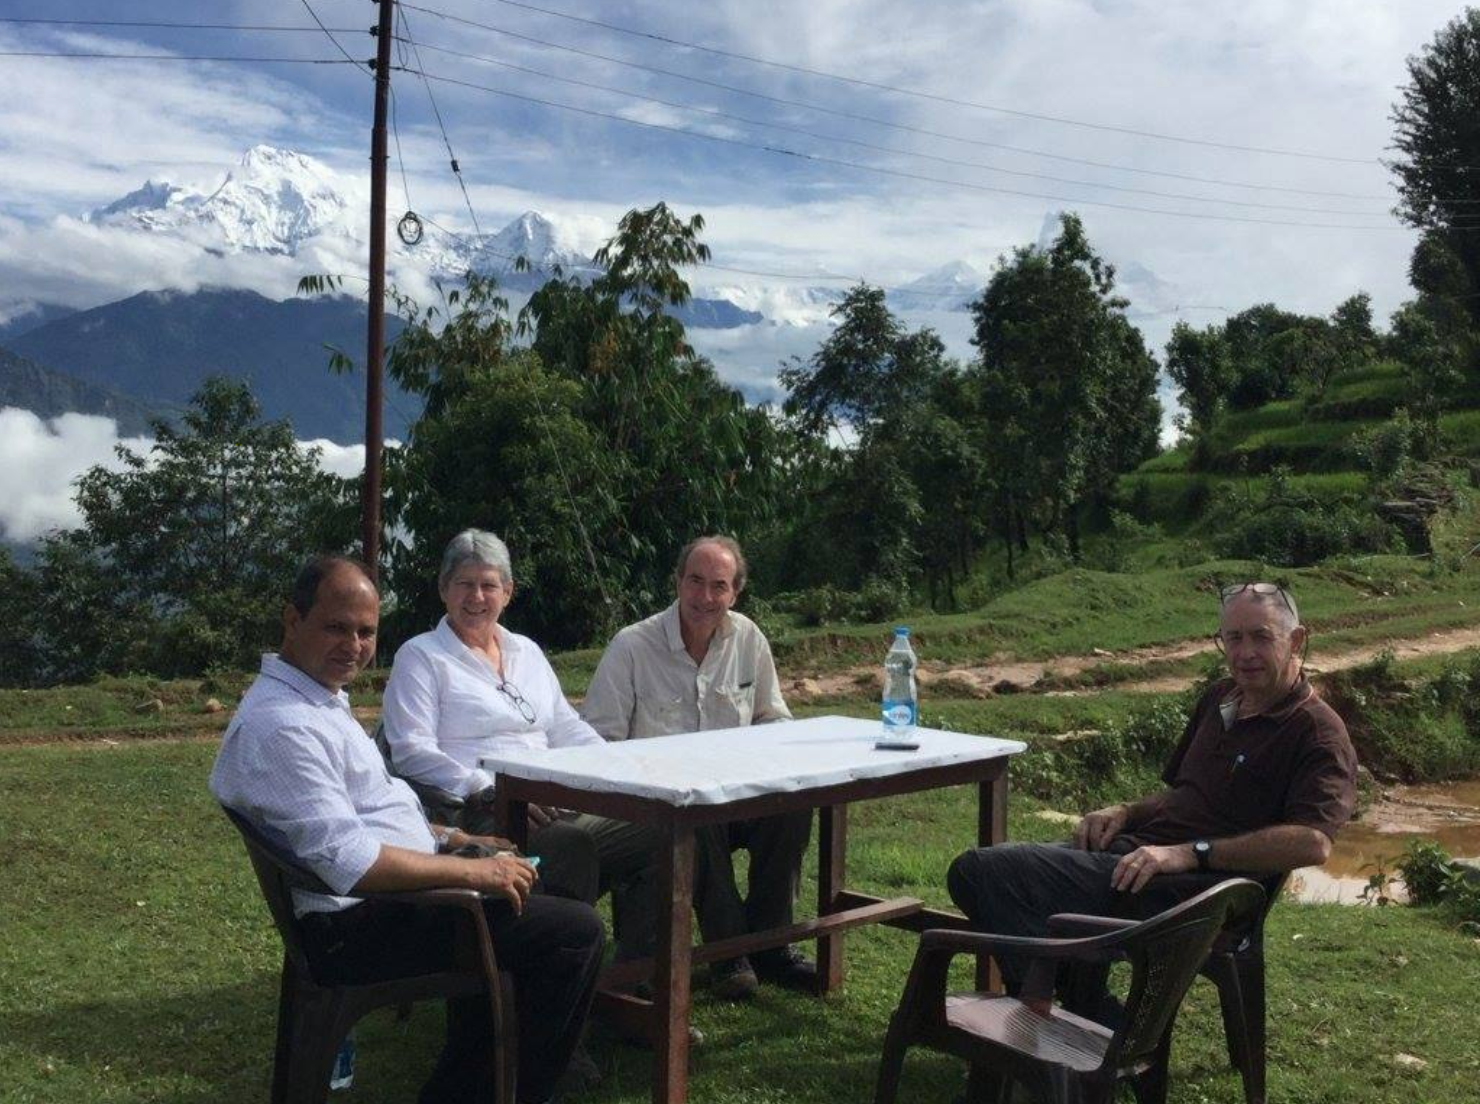 Reviewing the ongoing research intervention "Community education through singing and dancing health messages" with Laureate Professor Roger Smith AM, Mrs. Annie Smith and Mr. David Young OAM at the rural village (Ramja) of Parbat district.